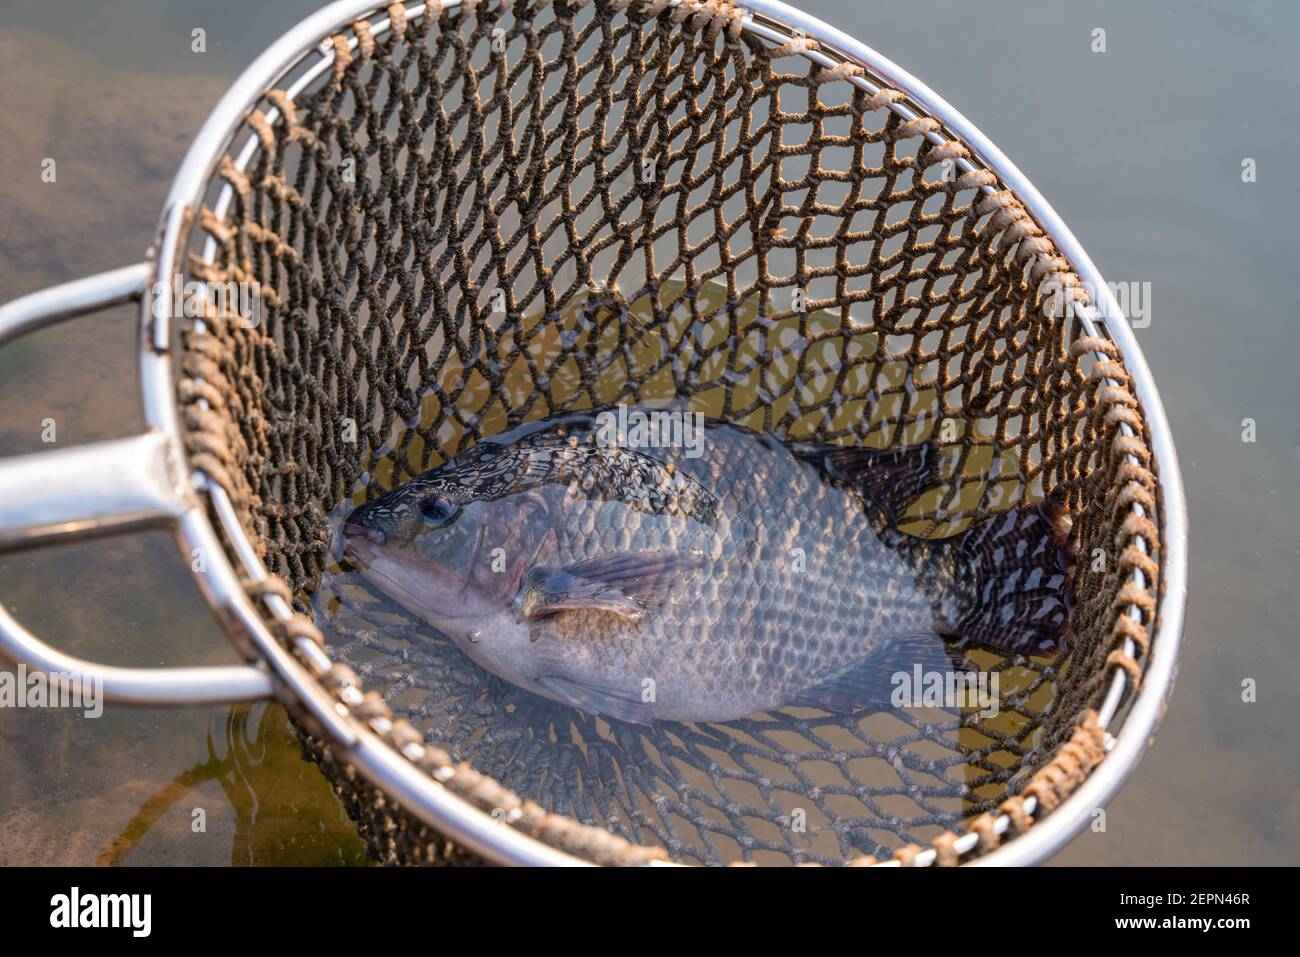 Close up fisherman catch tilapia fish, freshwater fish that was raised in ponds and cages. Stock Photo